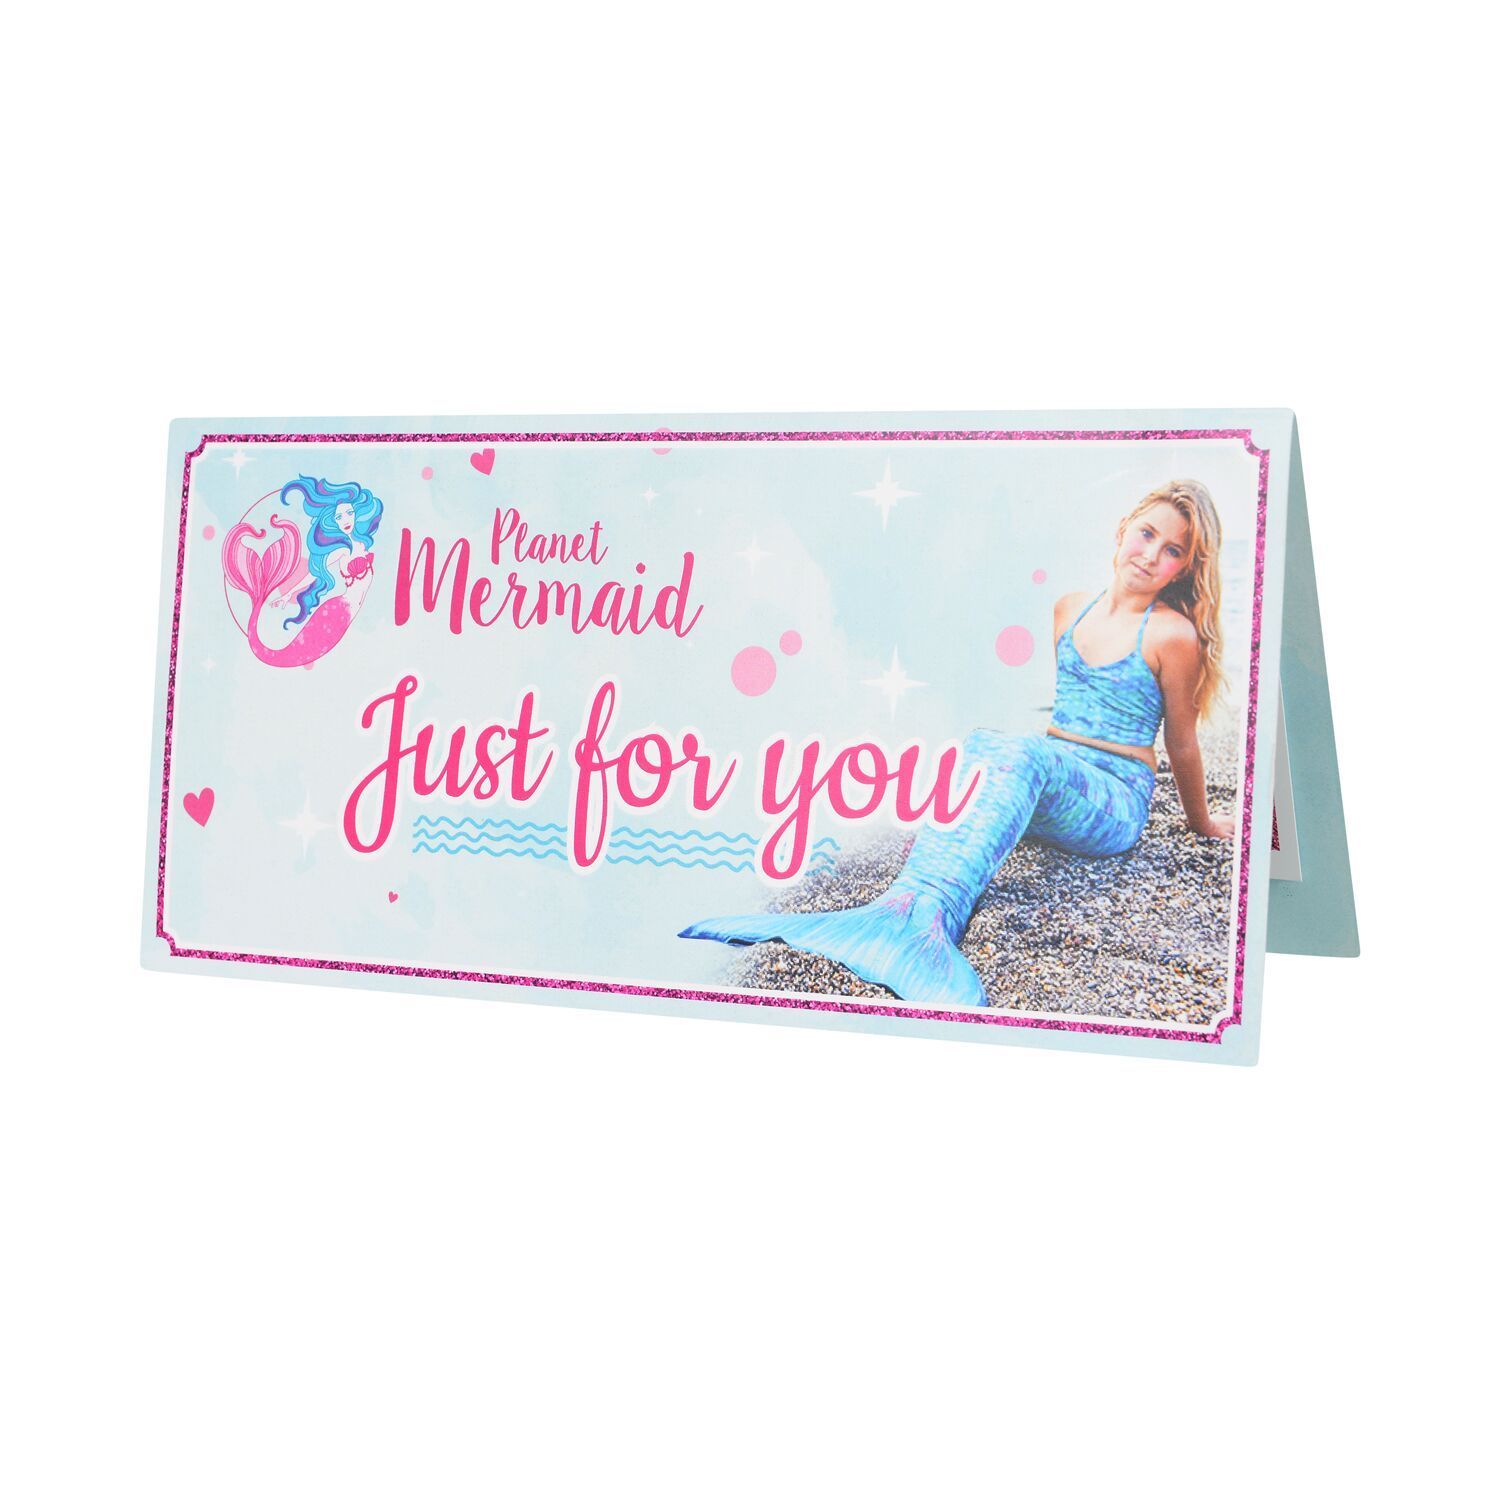 Just for you Mermaid Gift Card from Planet Mermaid